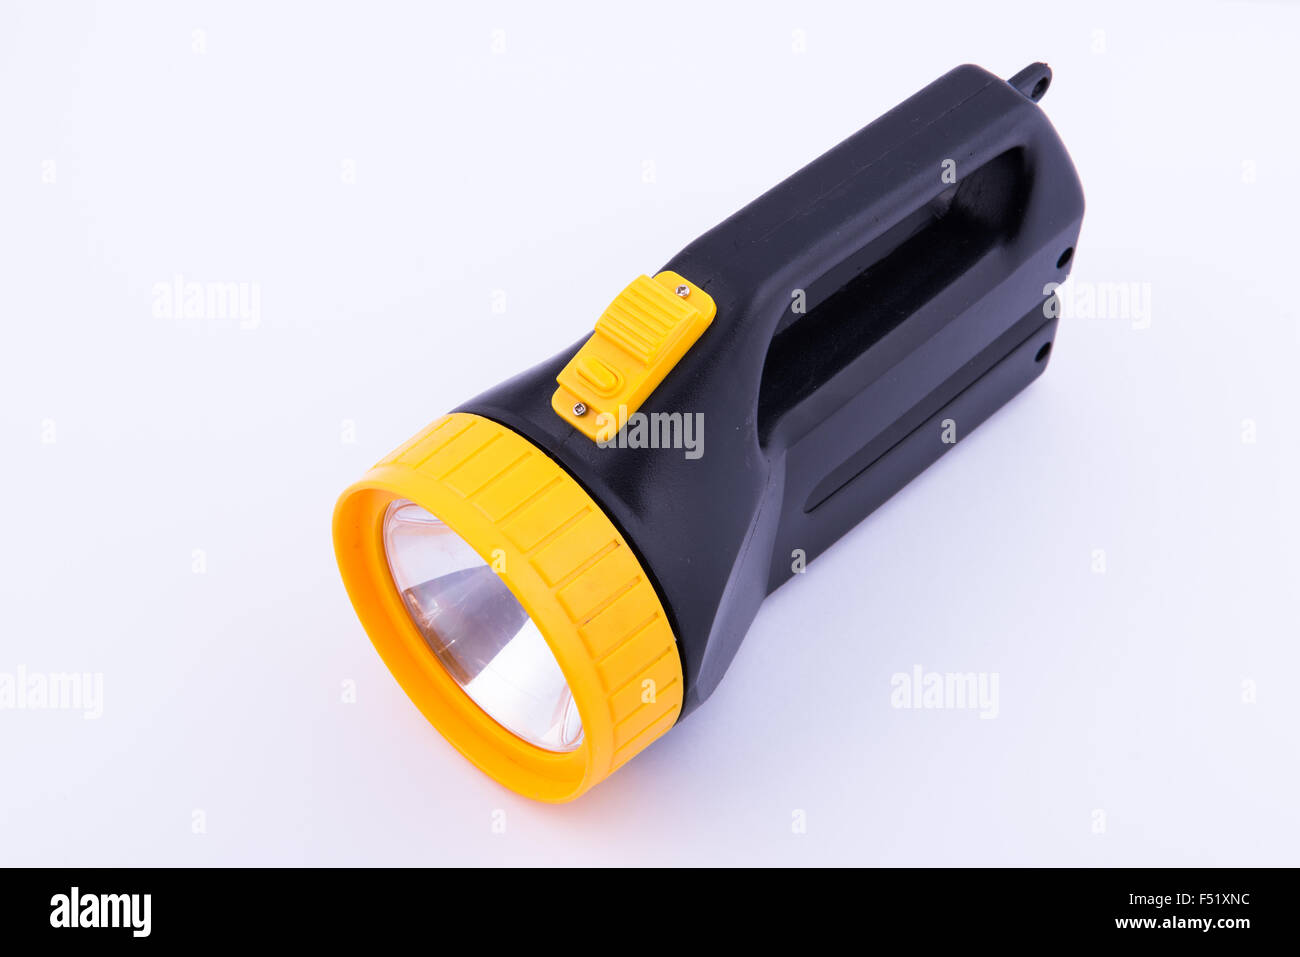 heavy duty torch on white background Stock Photo